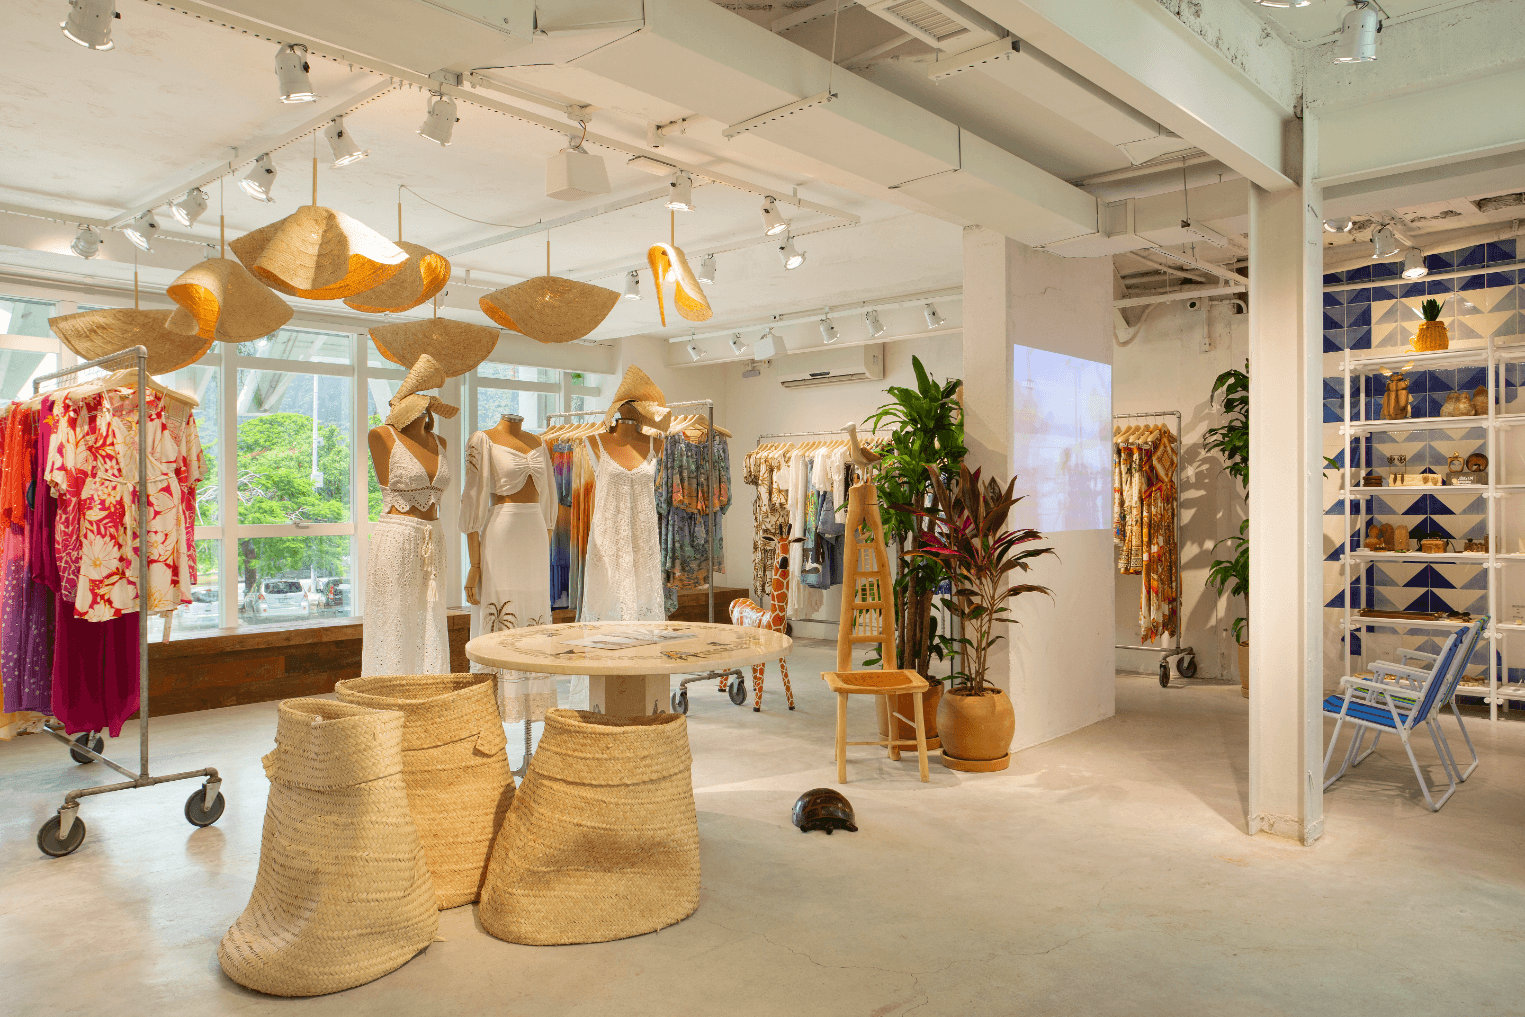 Interior of a clothing boutique. The layout is modern. Three mannequins in the centre of the room are dressed in bohemian, beachy attire. Two beach chairs face a film projection on an otherwise blank wall. There are exposed steel beams and a steel pillar, and ceiling lights with shades that resemble sun hats. Three large, slouchy raffia baskets sit on the cement floor next to a round table. Four racks of clothing in warm colours are dotted around the room. A shelving unit holds jewelry and home decor.